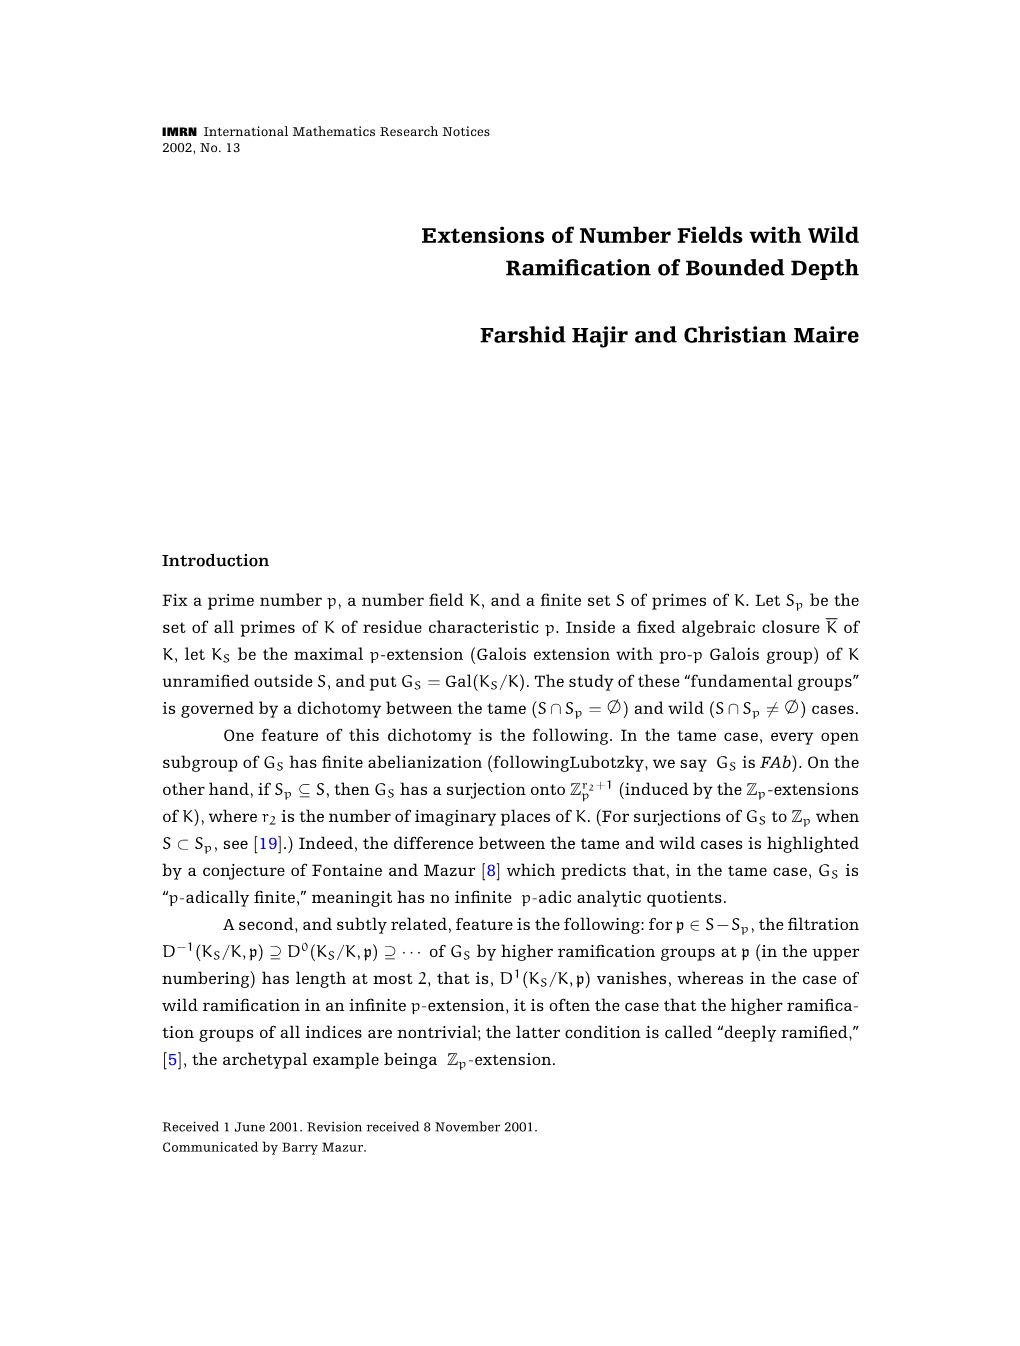 Extensions of Number Fields with Wild Ramification Of